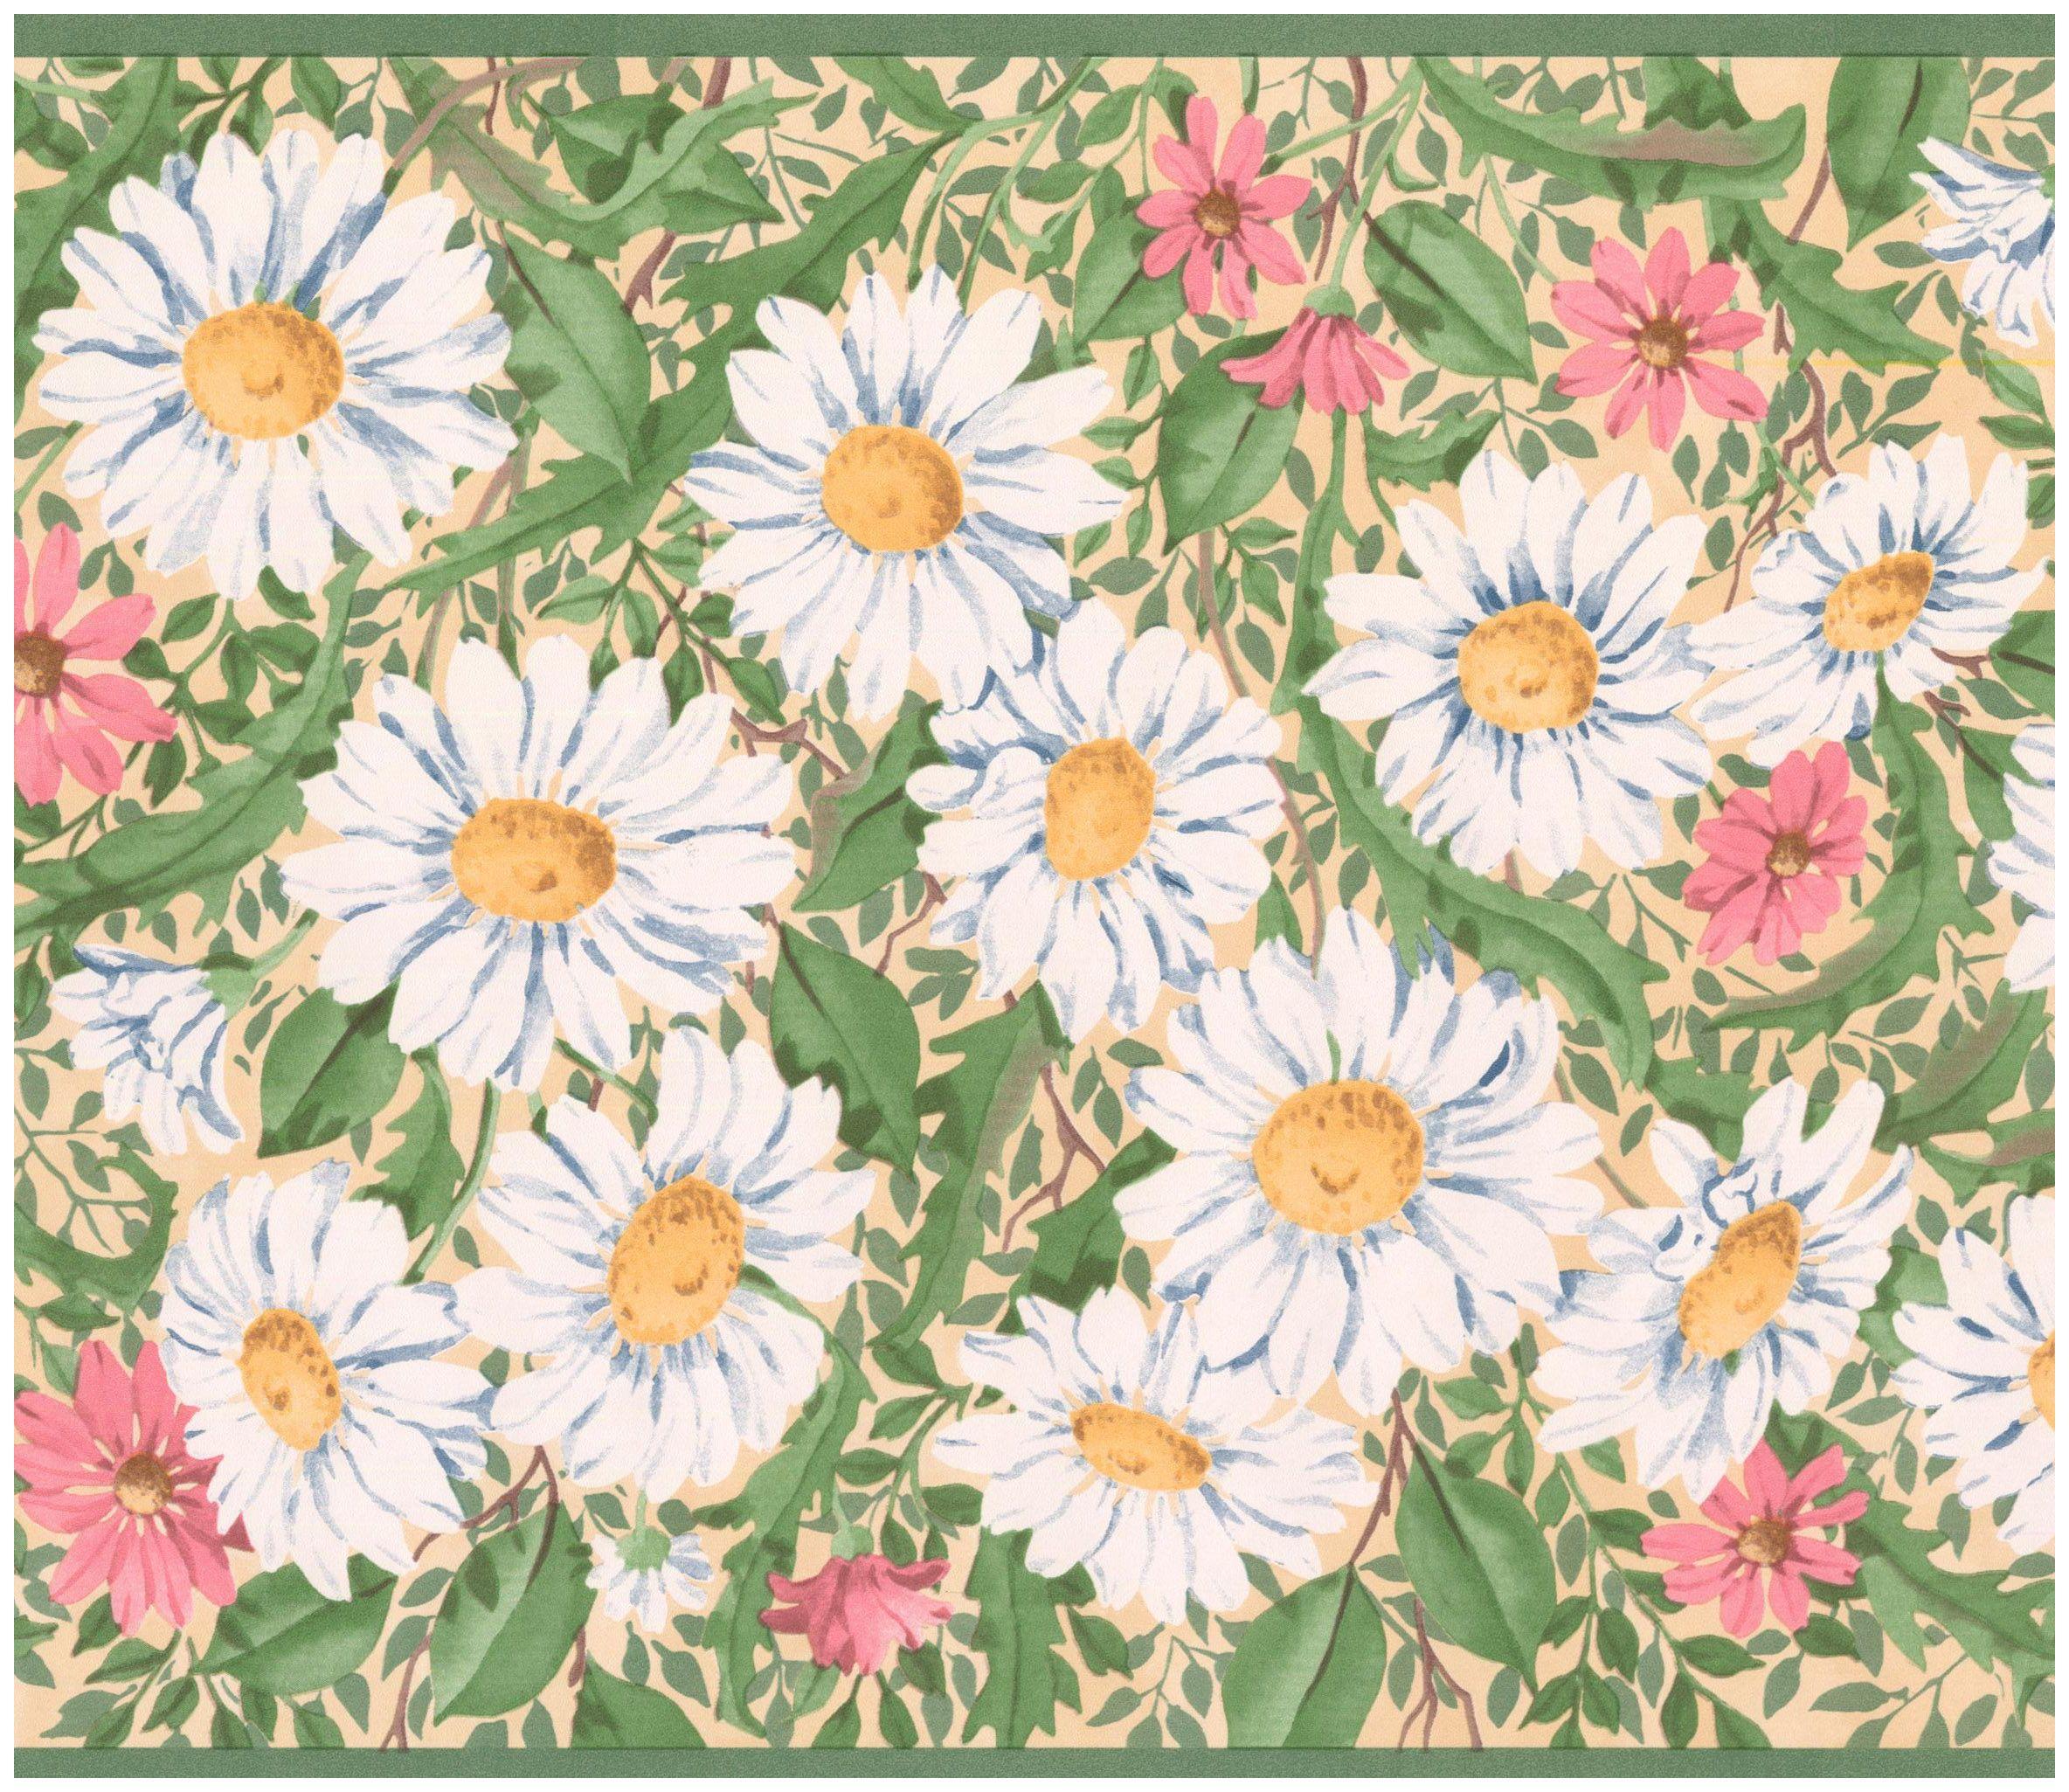 Vintage Daisy Wallpapers - Top Free Vintage Daisy Backgrounds